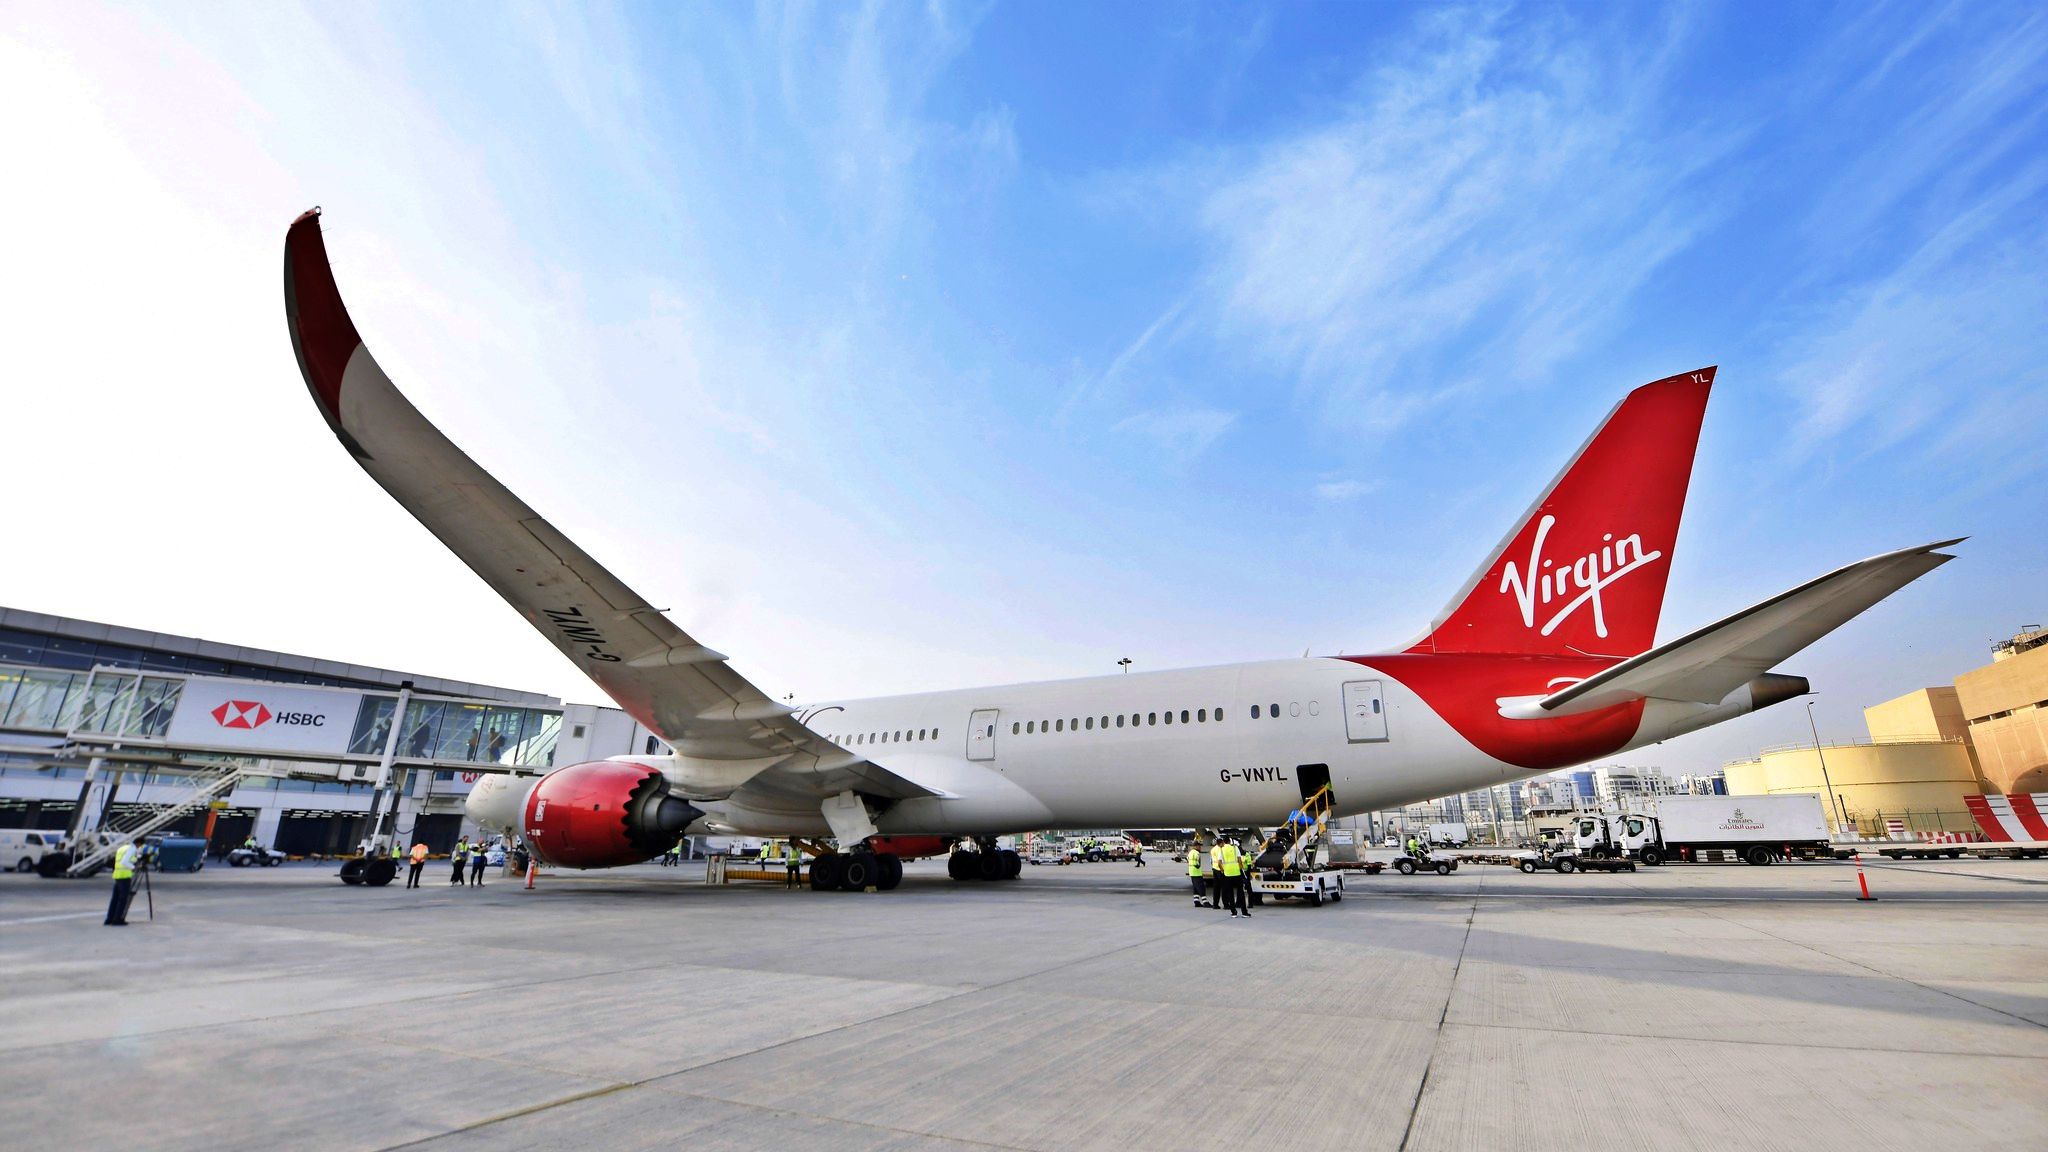 Virgin Atlantic makes aviation history with first sustainable flight